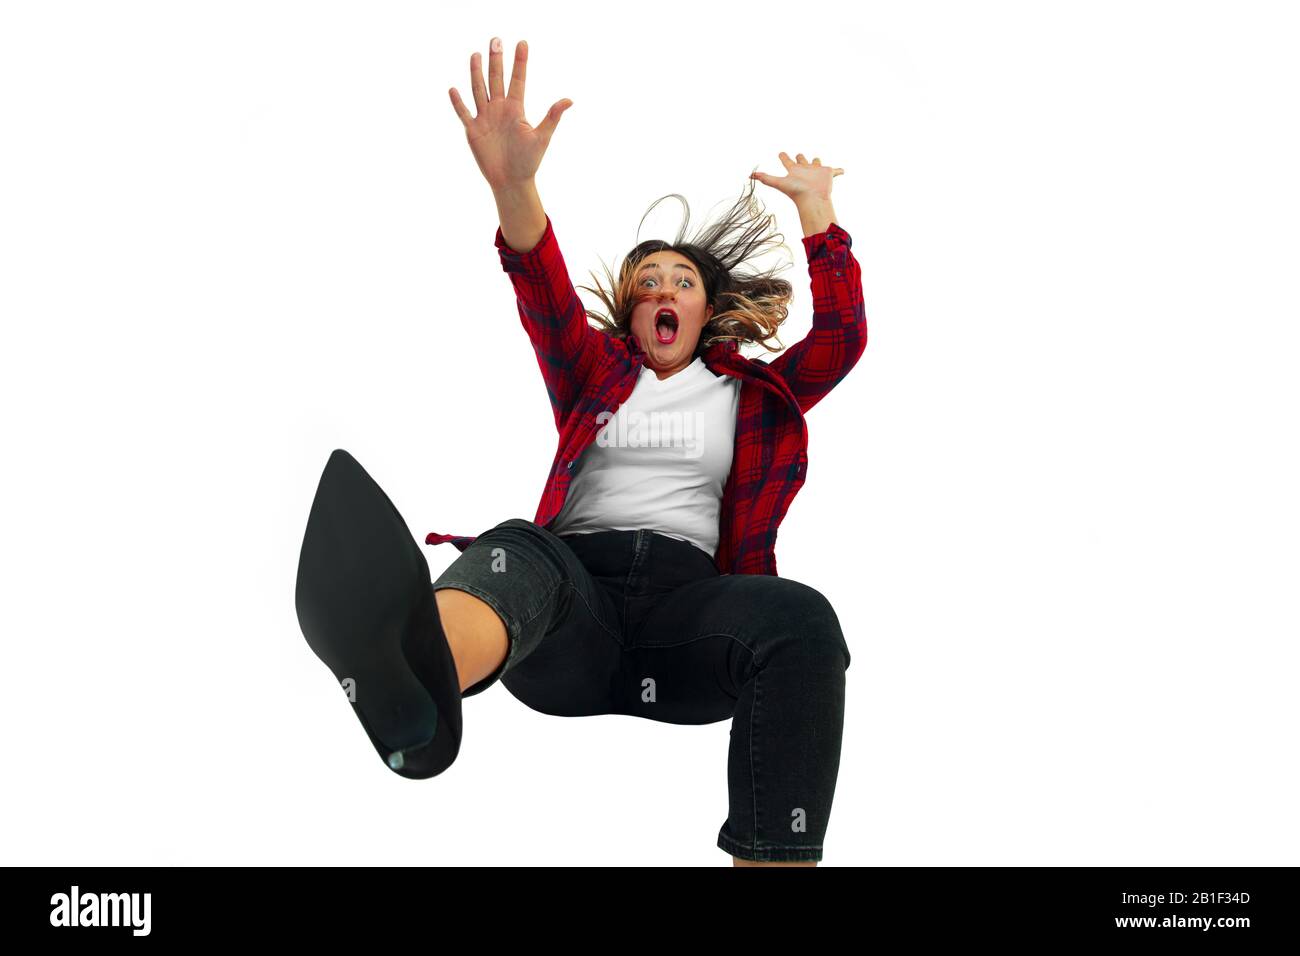 A second before falling. Caucasian young girl falling down in moment with bright emotions and facial expression. Female model in casual clothes. Shocked, scared, screaming. Copyspace for ad. Stock Photo